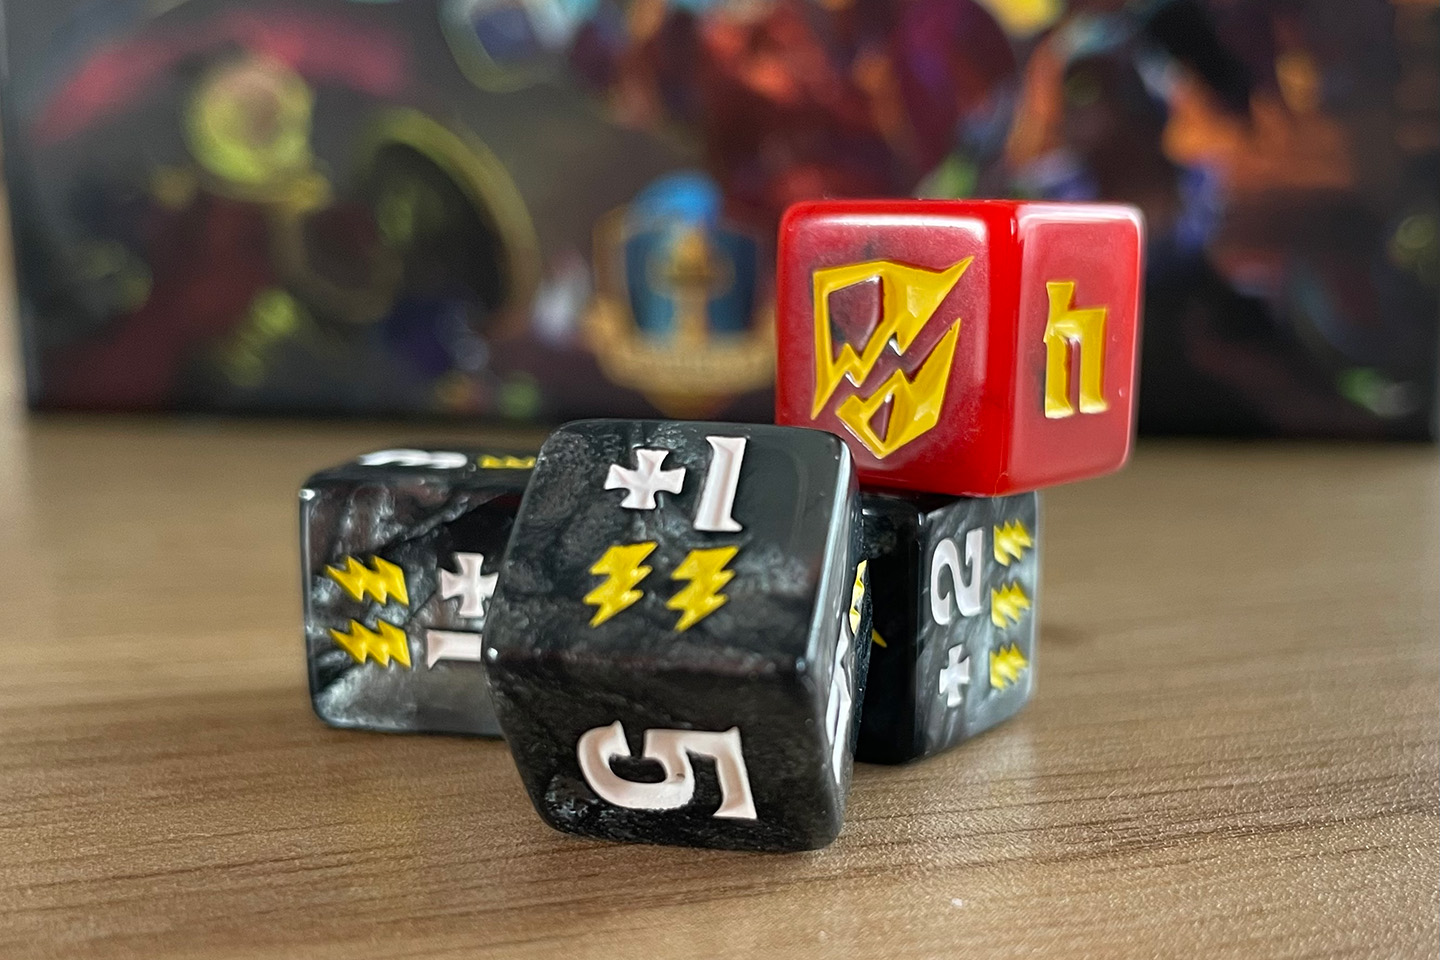 I love these dice.